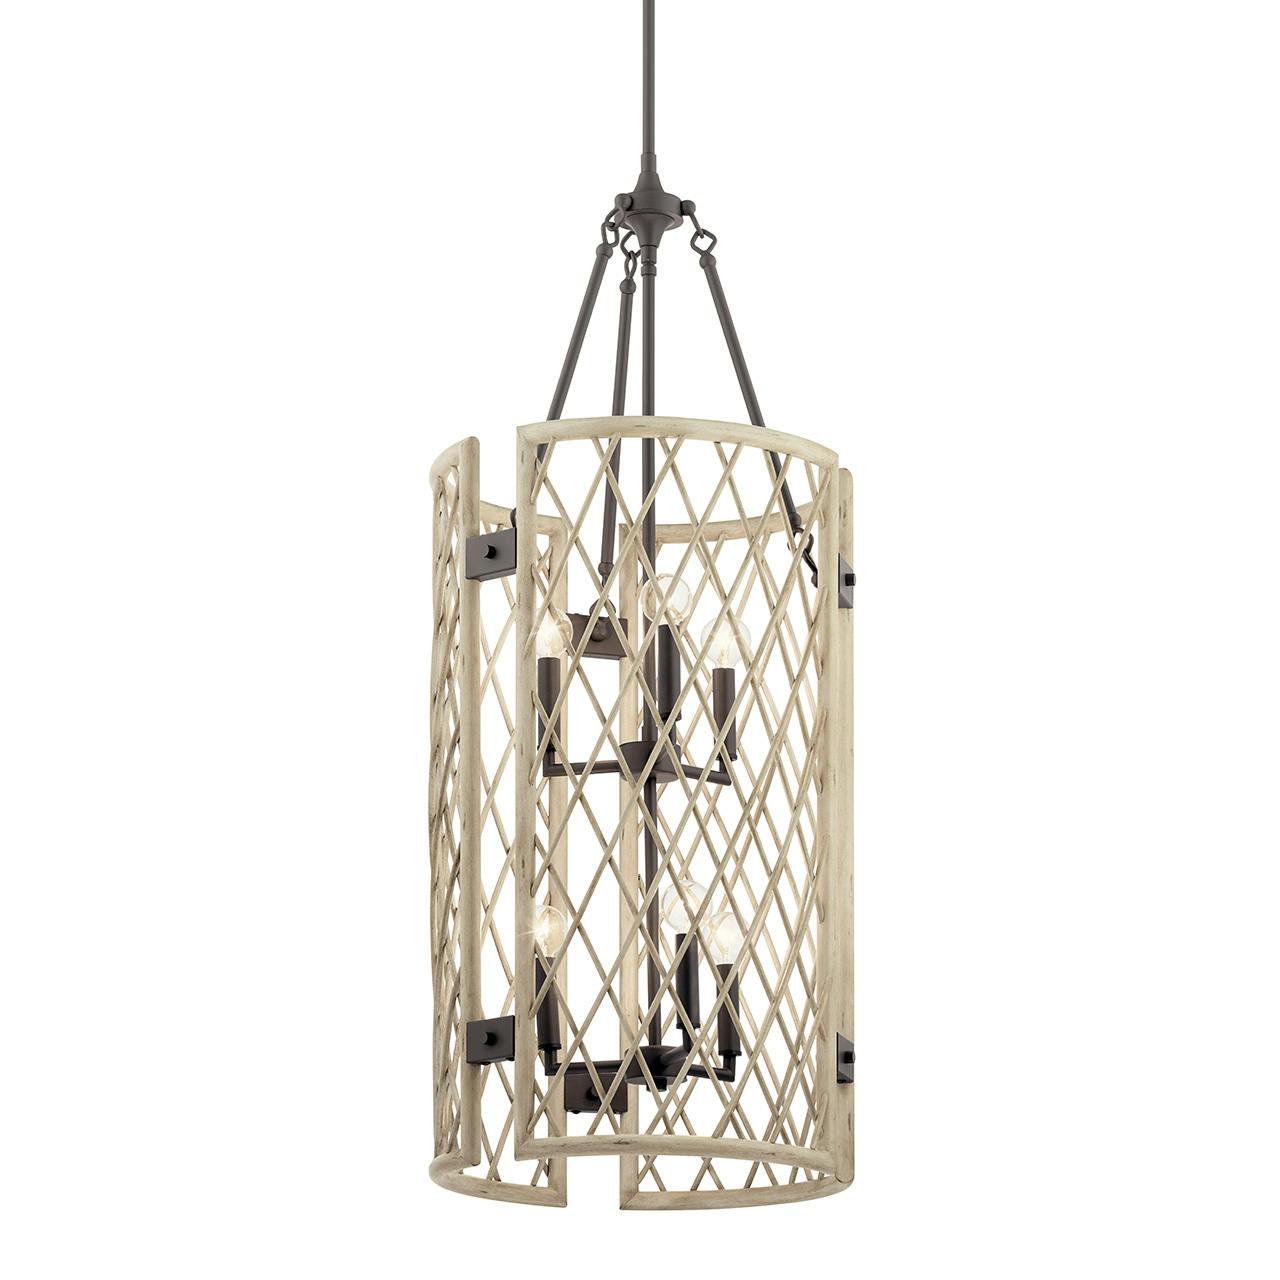 Oana 6 Light Chandelier White Washed without the canopy on a white background